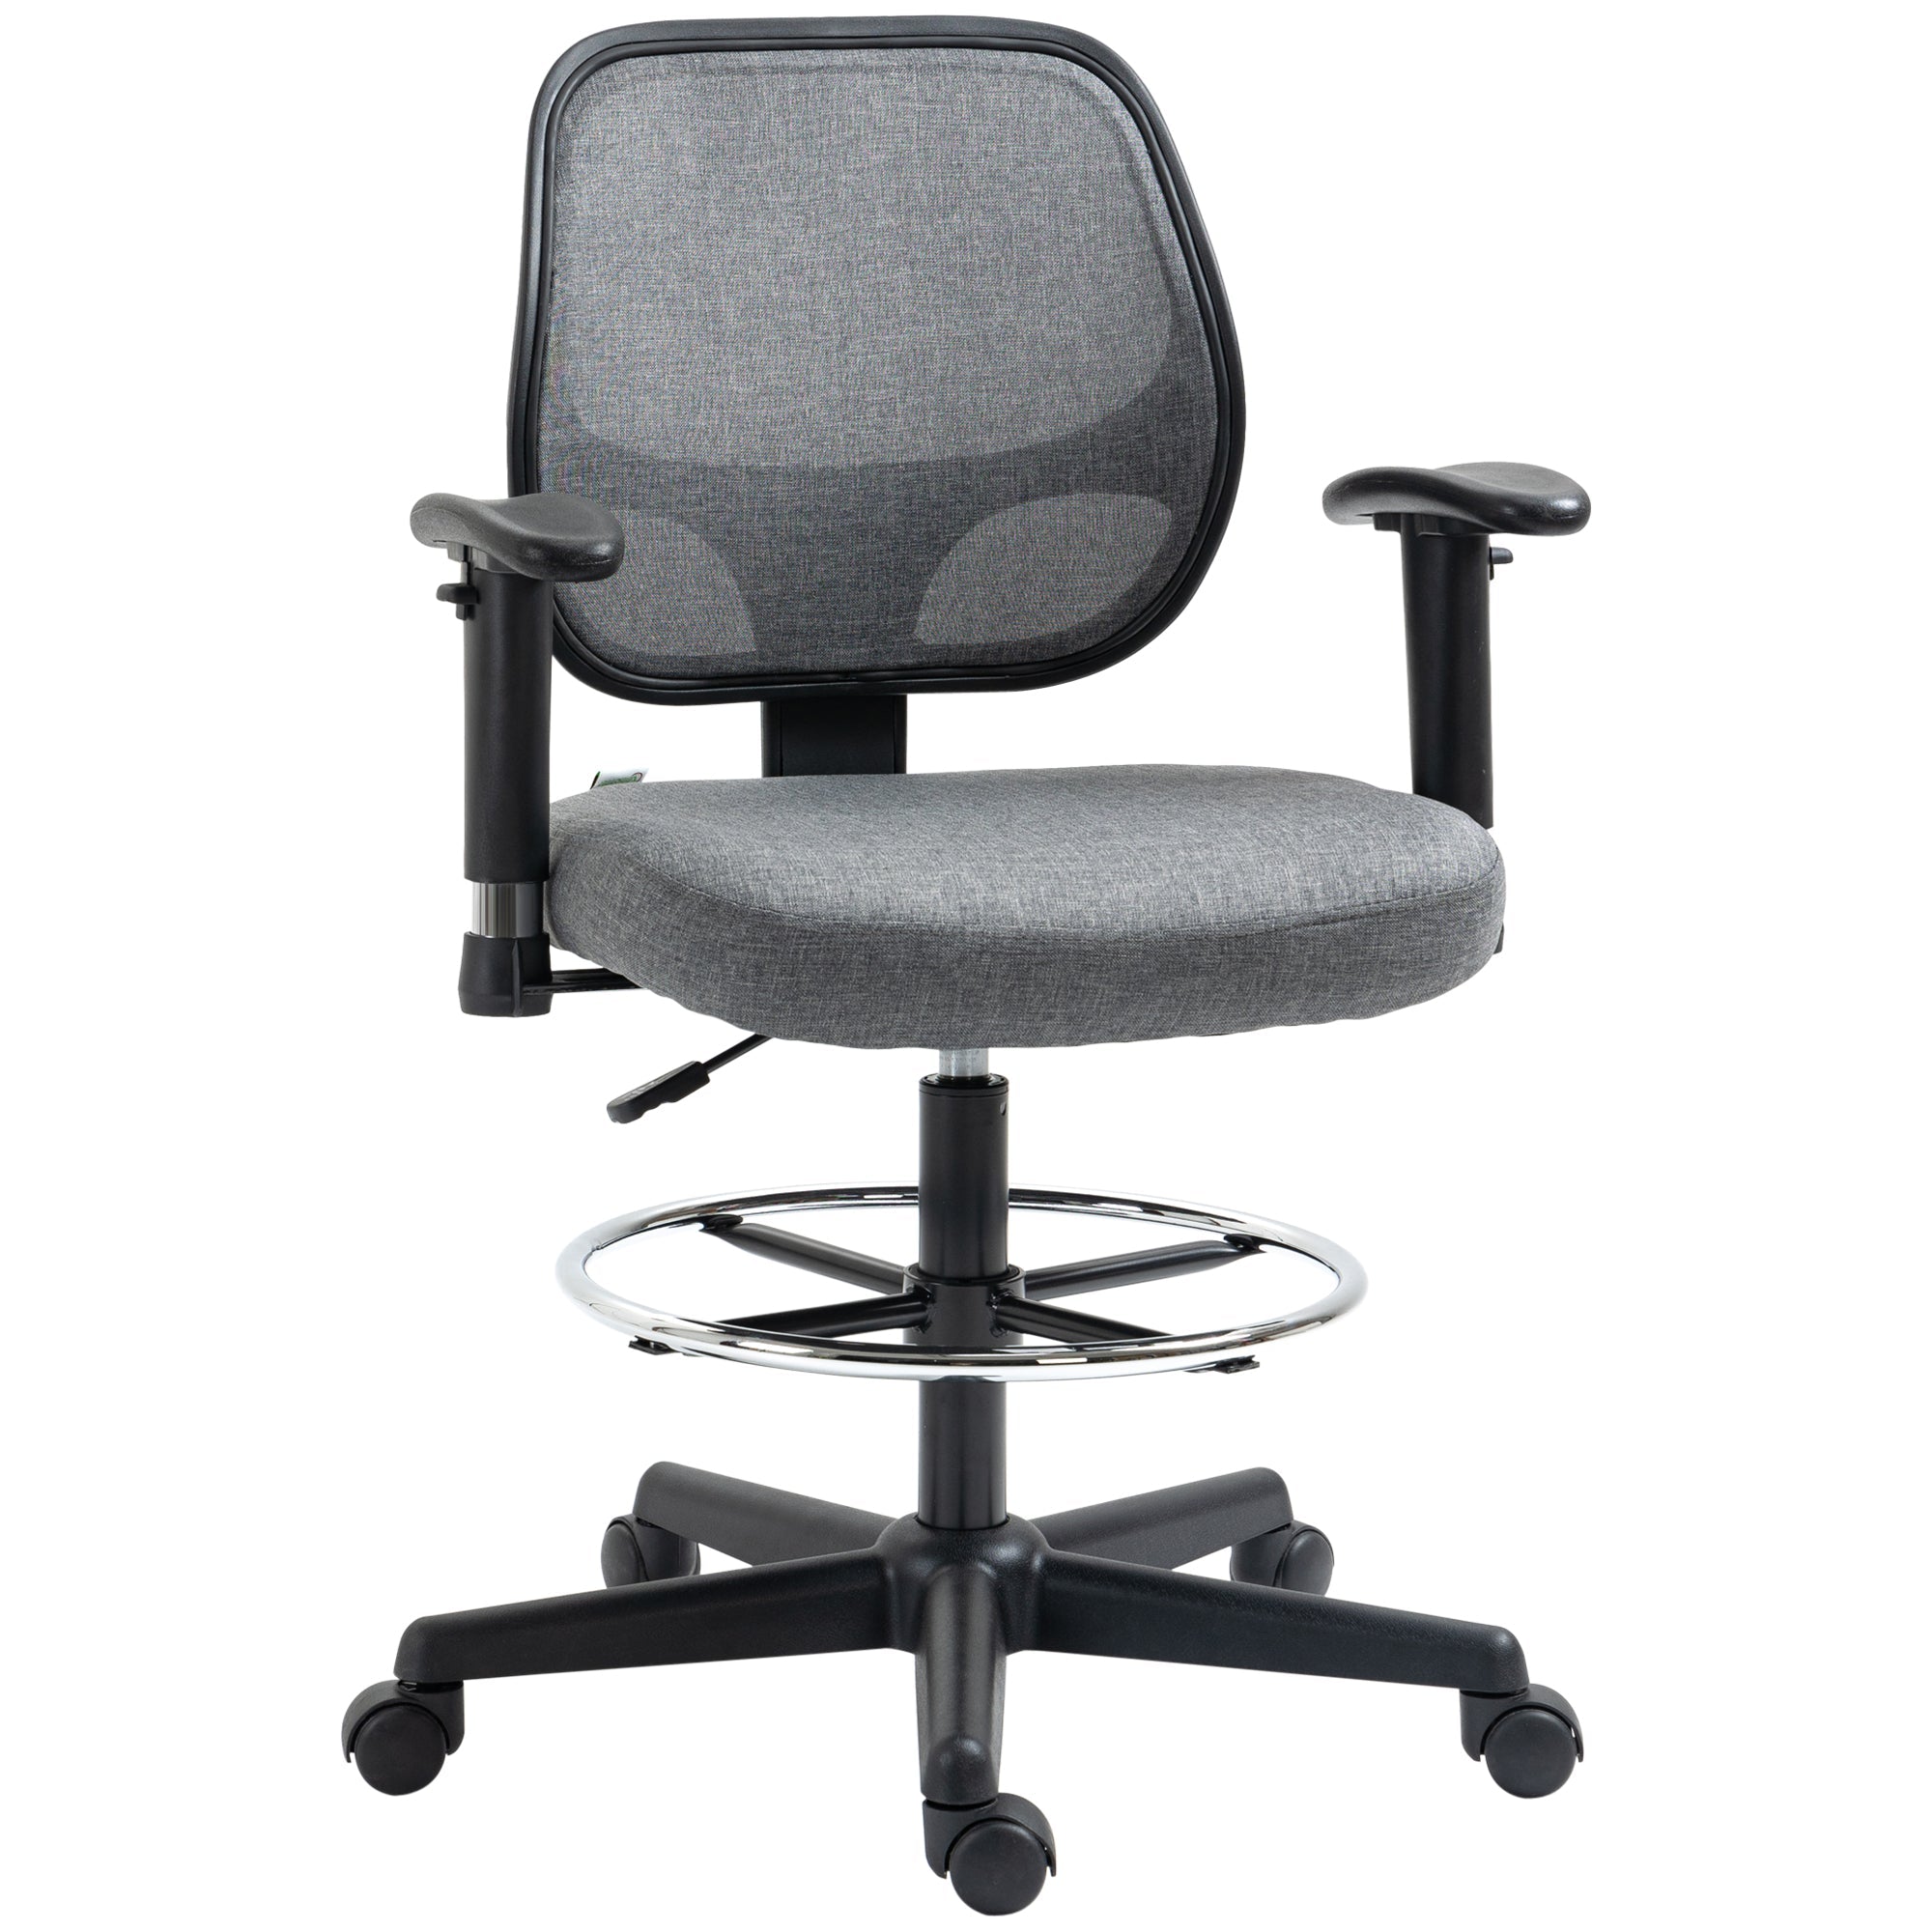 Drafting Chair Tall Office Fabric Standing Desk Chair with Adjustable Footrest Ring, Arm, Swivel Wheels, Grey-0